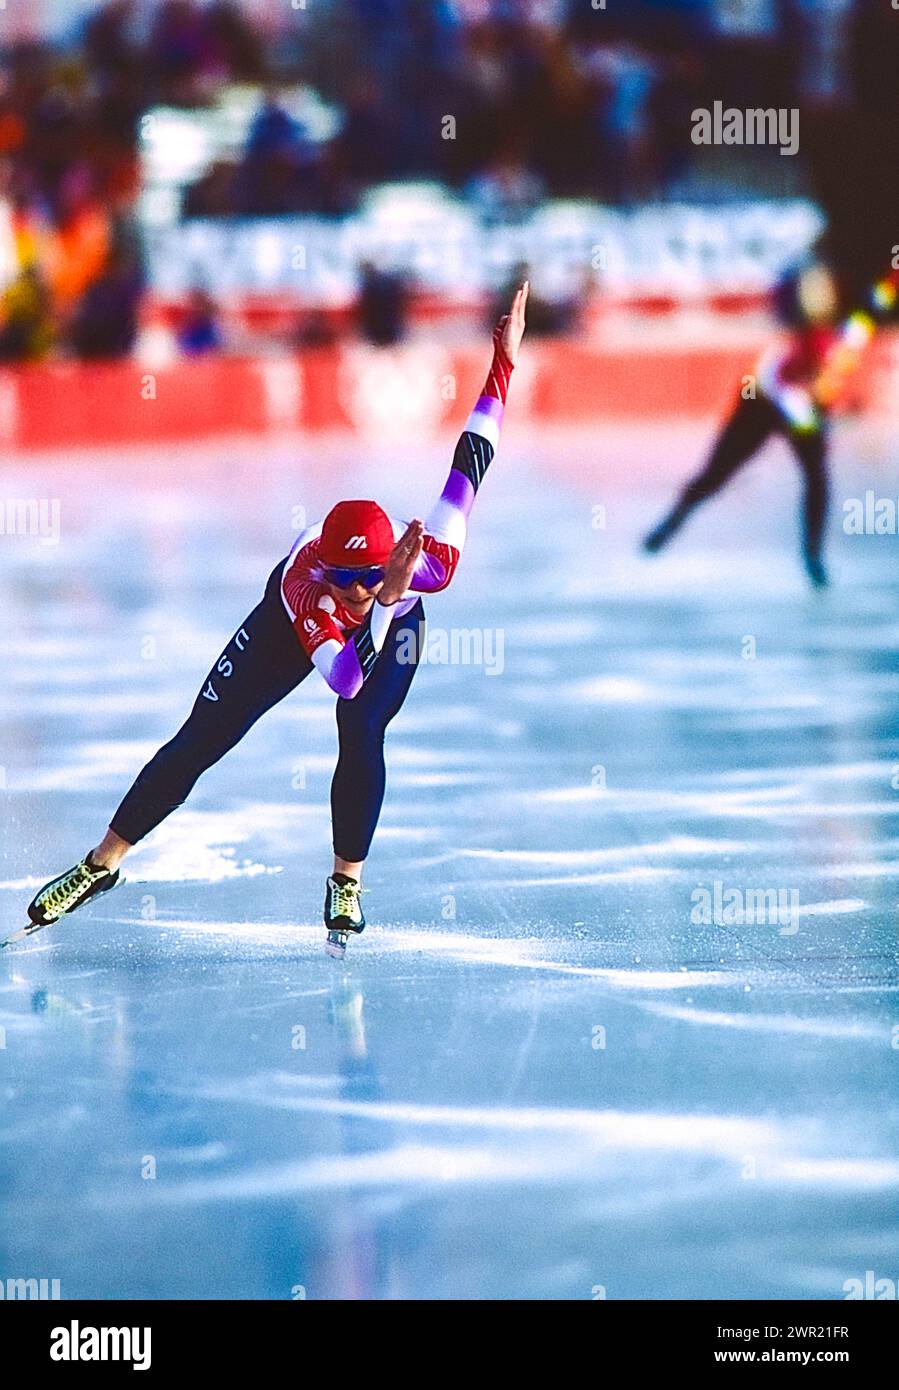 Bonnie Blair (USA) at the 1992 Olympic Winter Games. Stock Photo